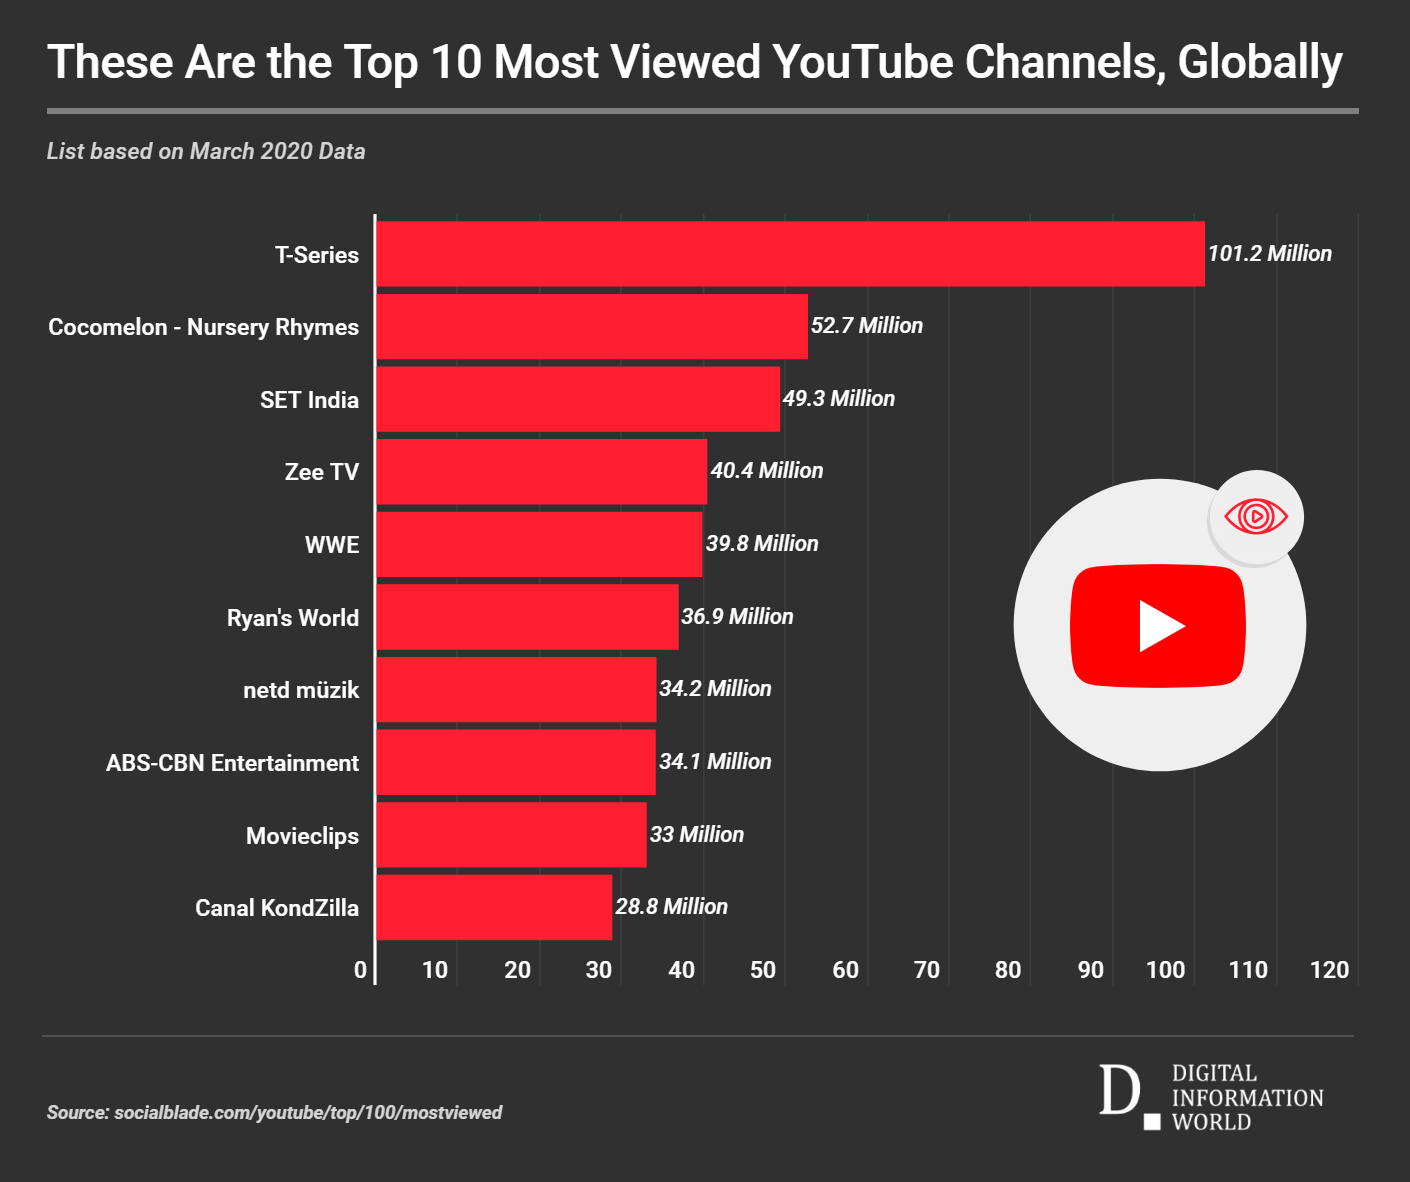 These Are the Top 10 Most Viewed YouTube Channels, Globally